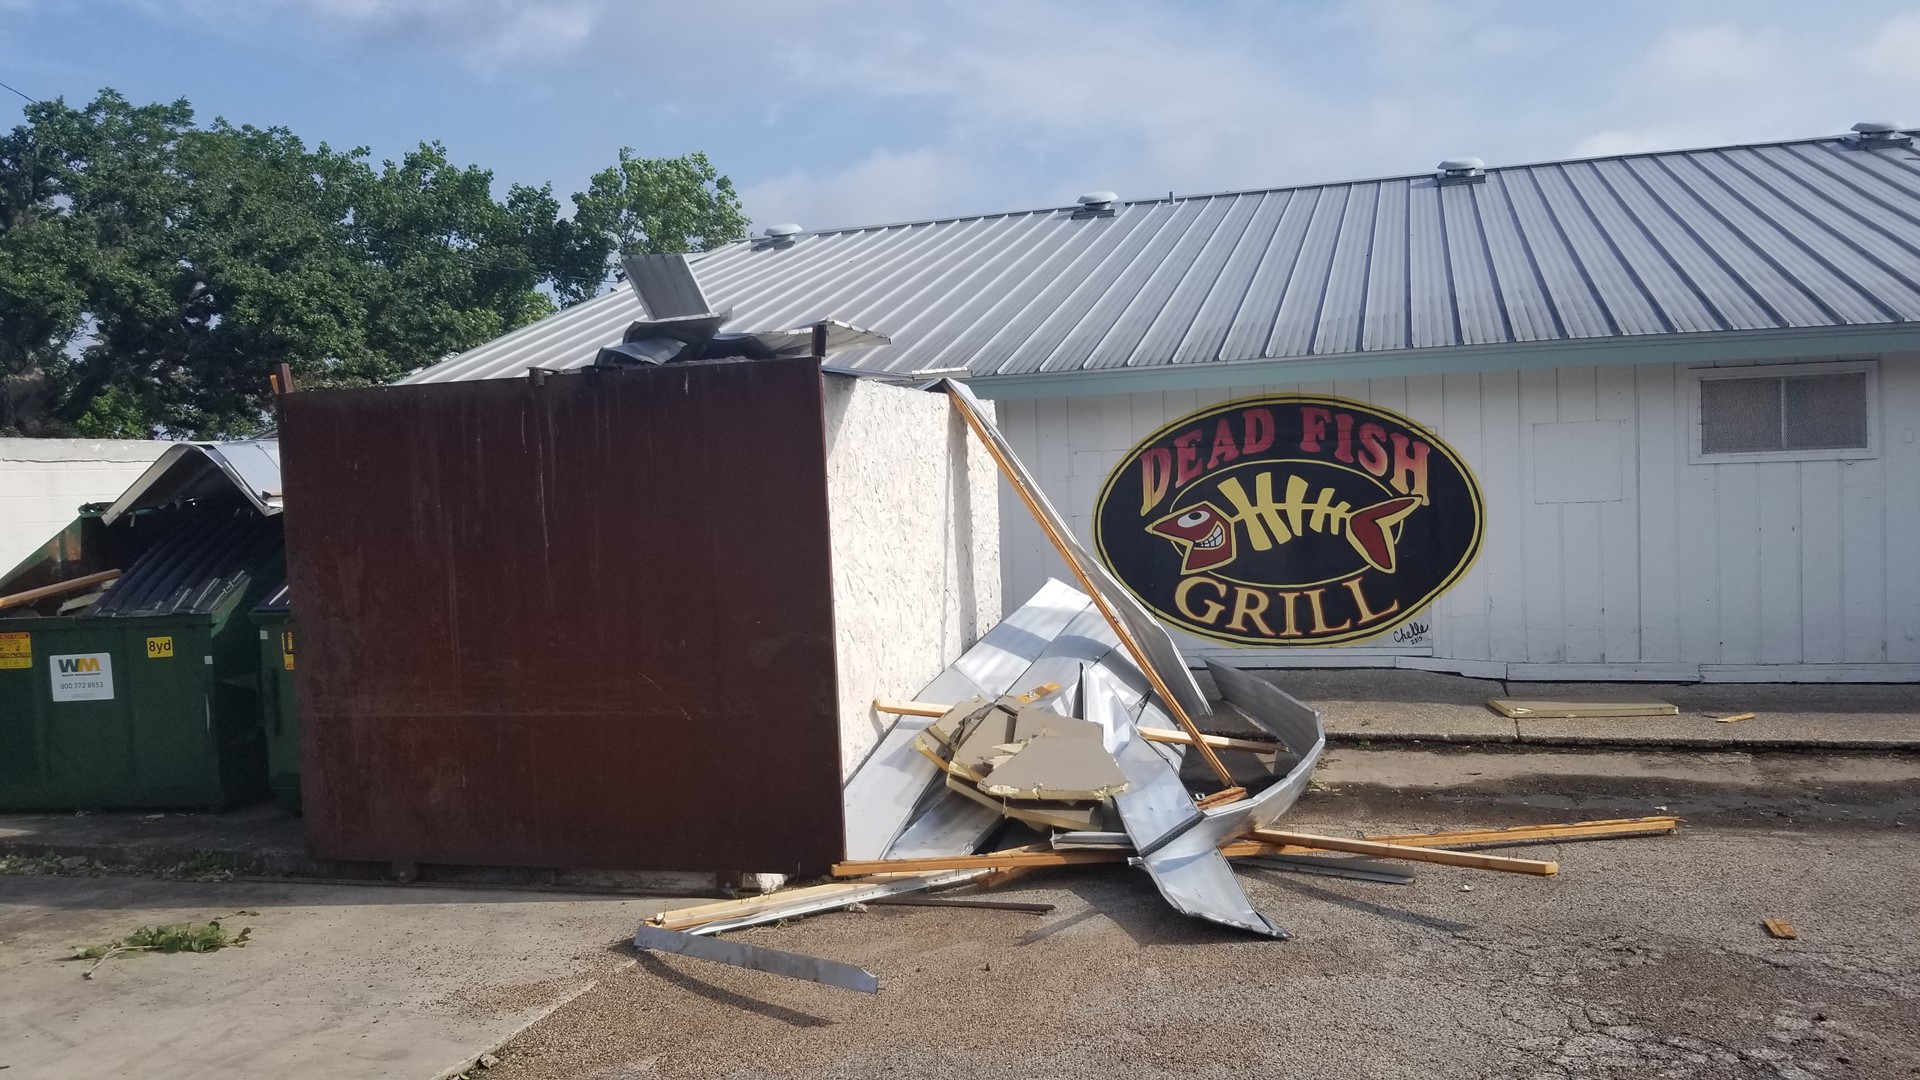 The seafood restaurant's roof and windows were damaged during thunderstorms in the area Wednesday night.